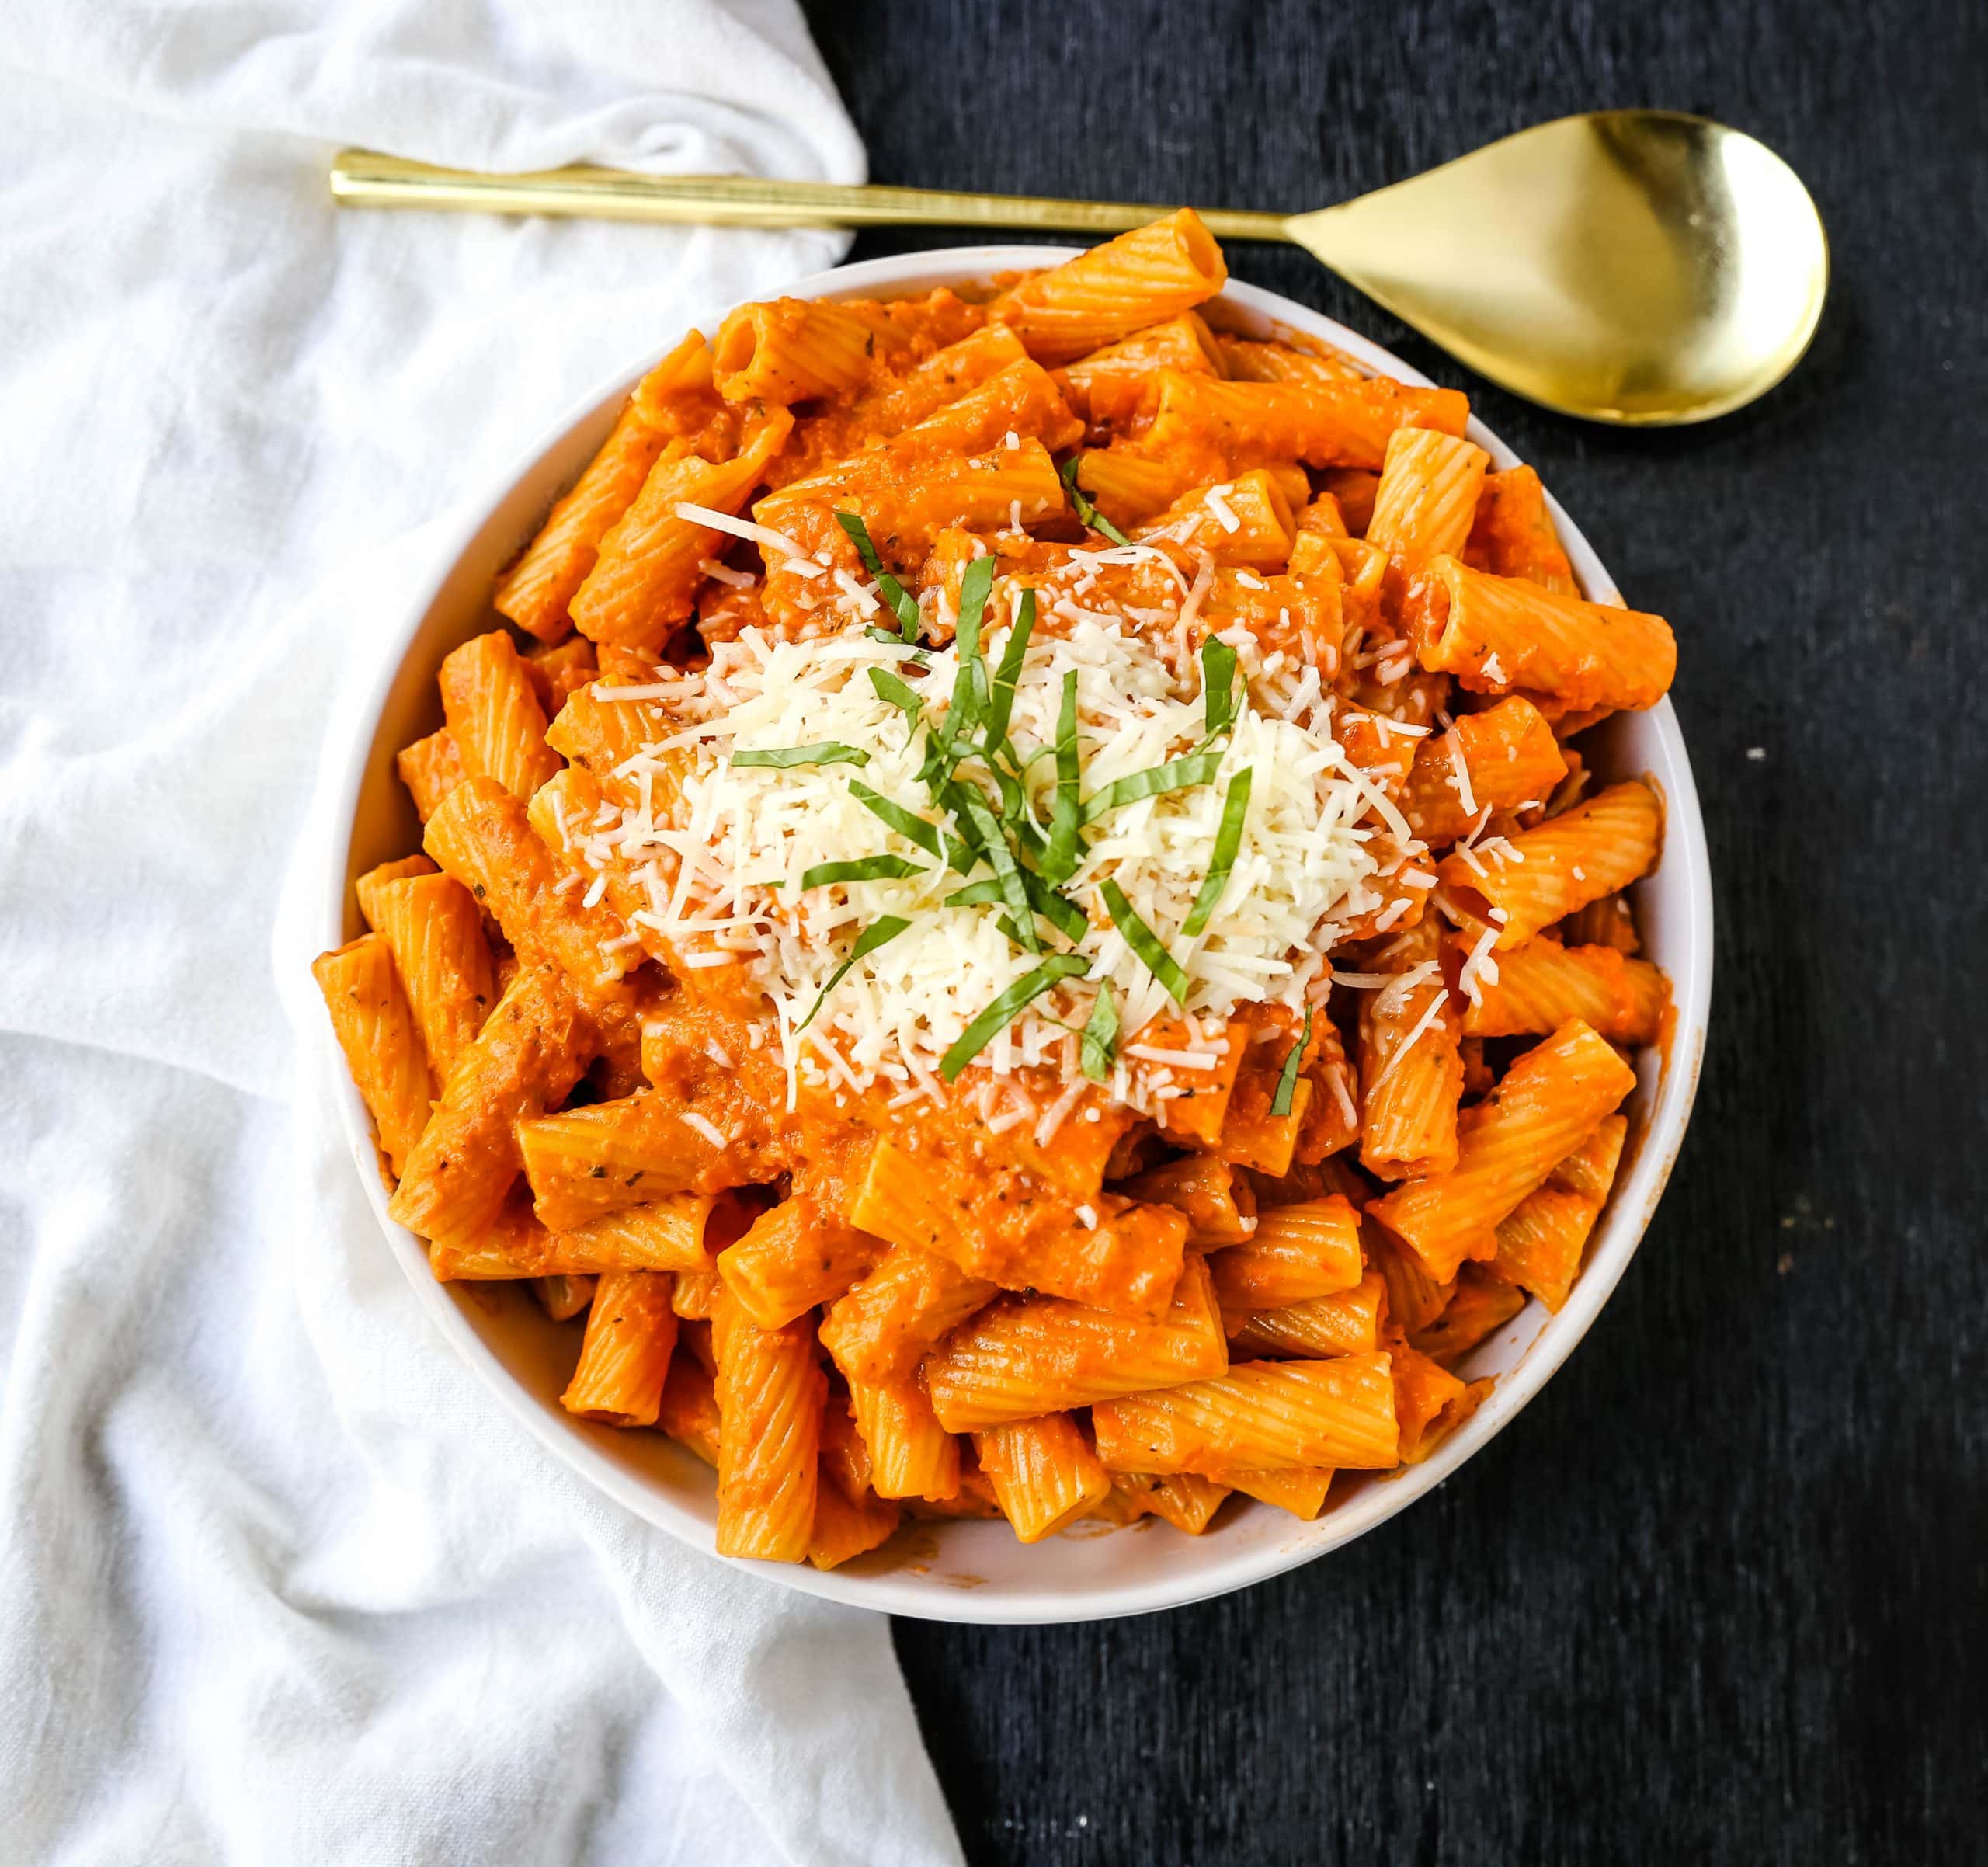 Creamy Roasted Red Pepper Pasta  A creamy roasted red pepper and tomato basil sauce with garlic and heavy cream all tossed together with pasta and topped with parmesan cheese. A flavorful robust pasta dish! www.modernhoney.com #pasta #italian #italianfood 